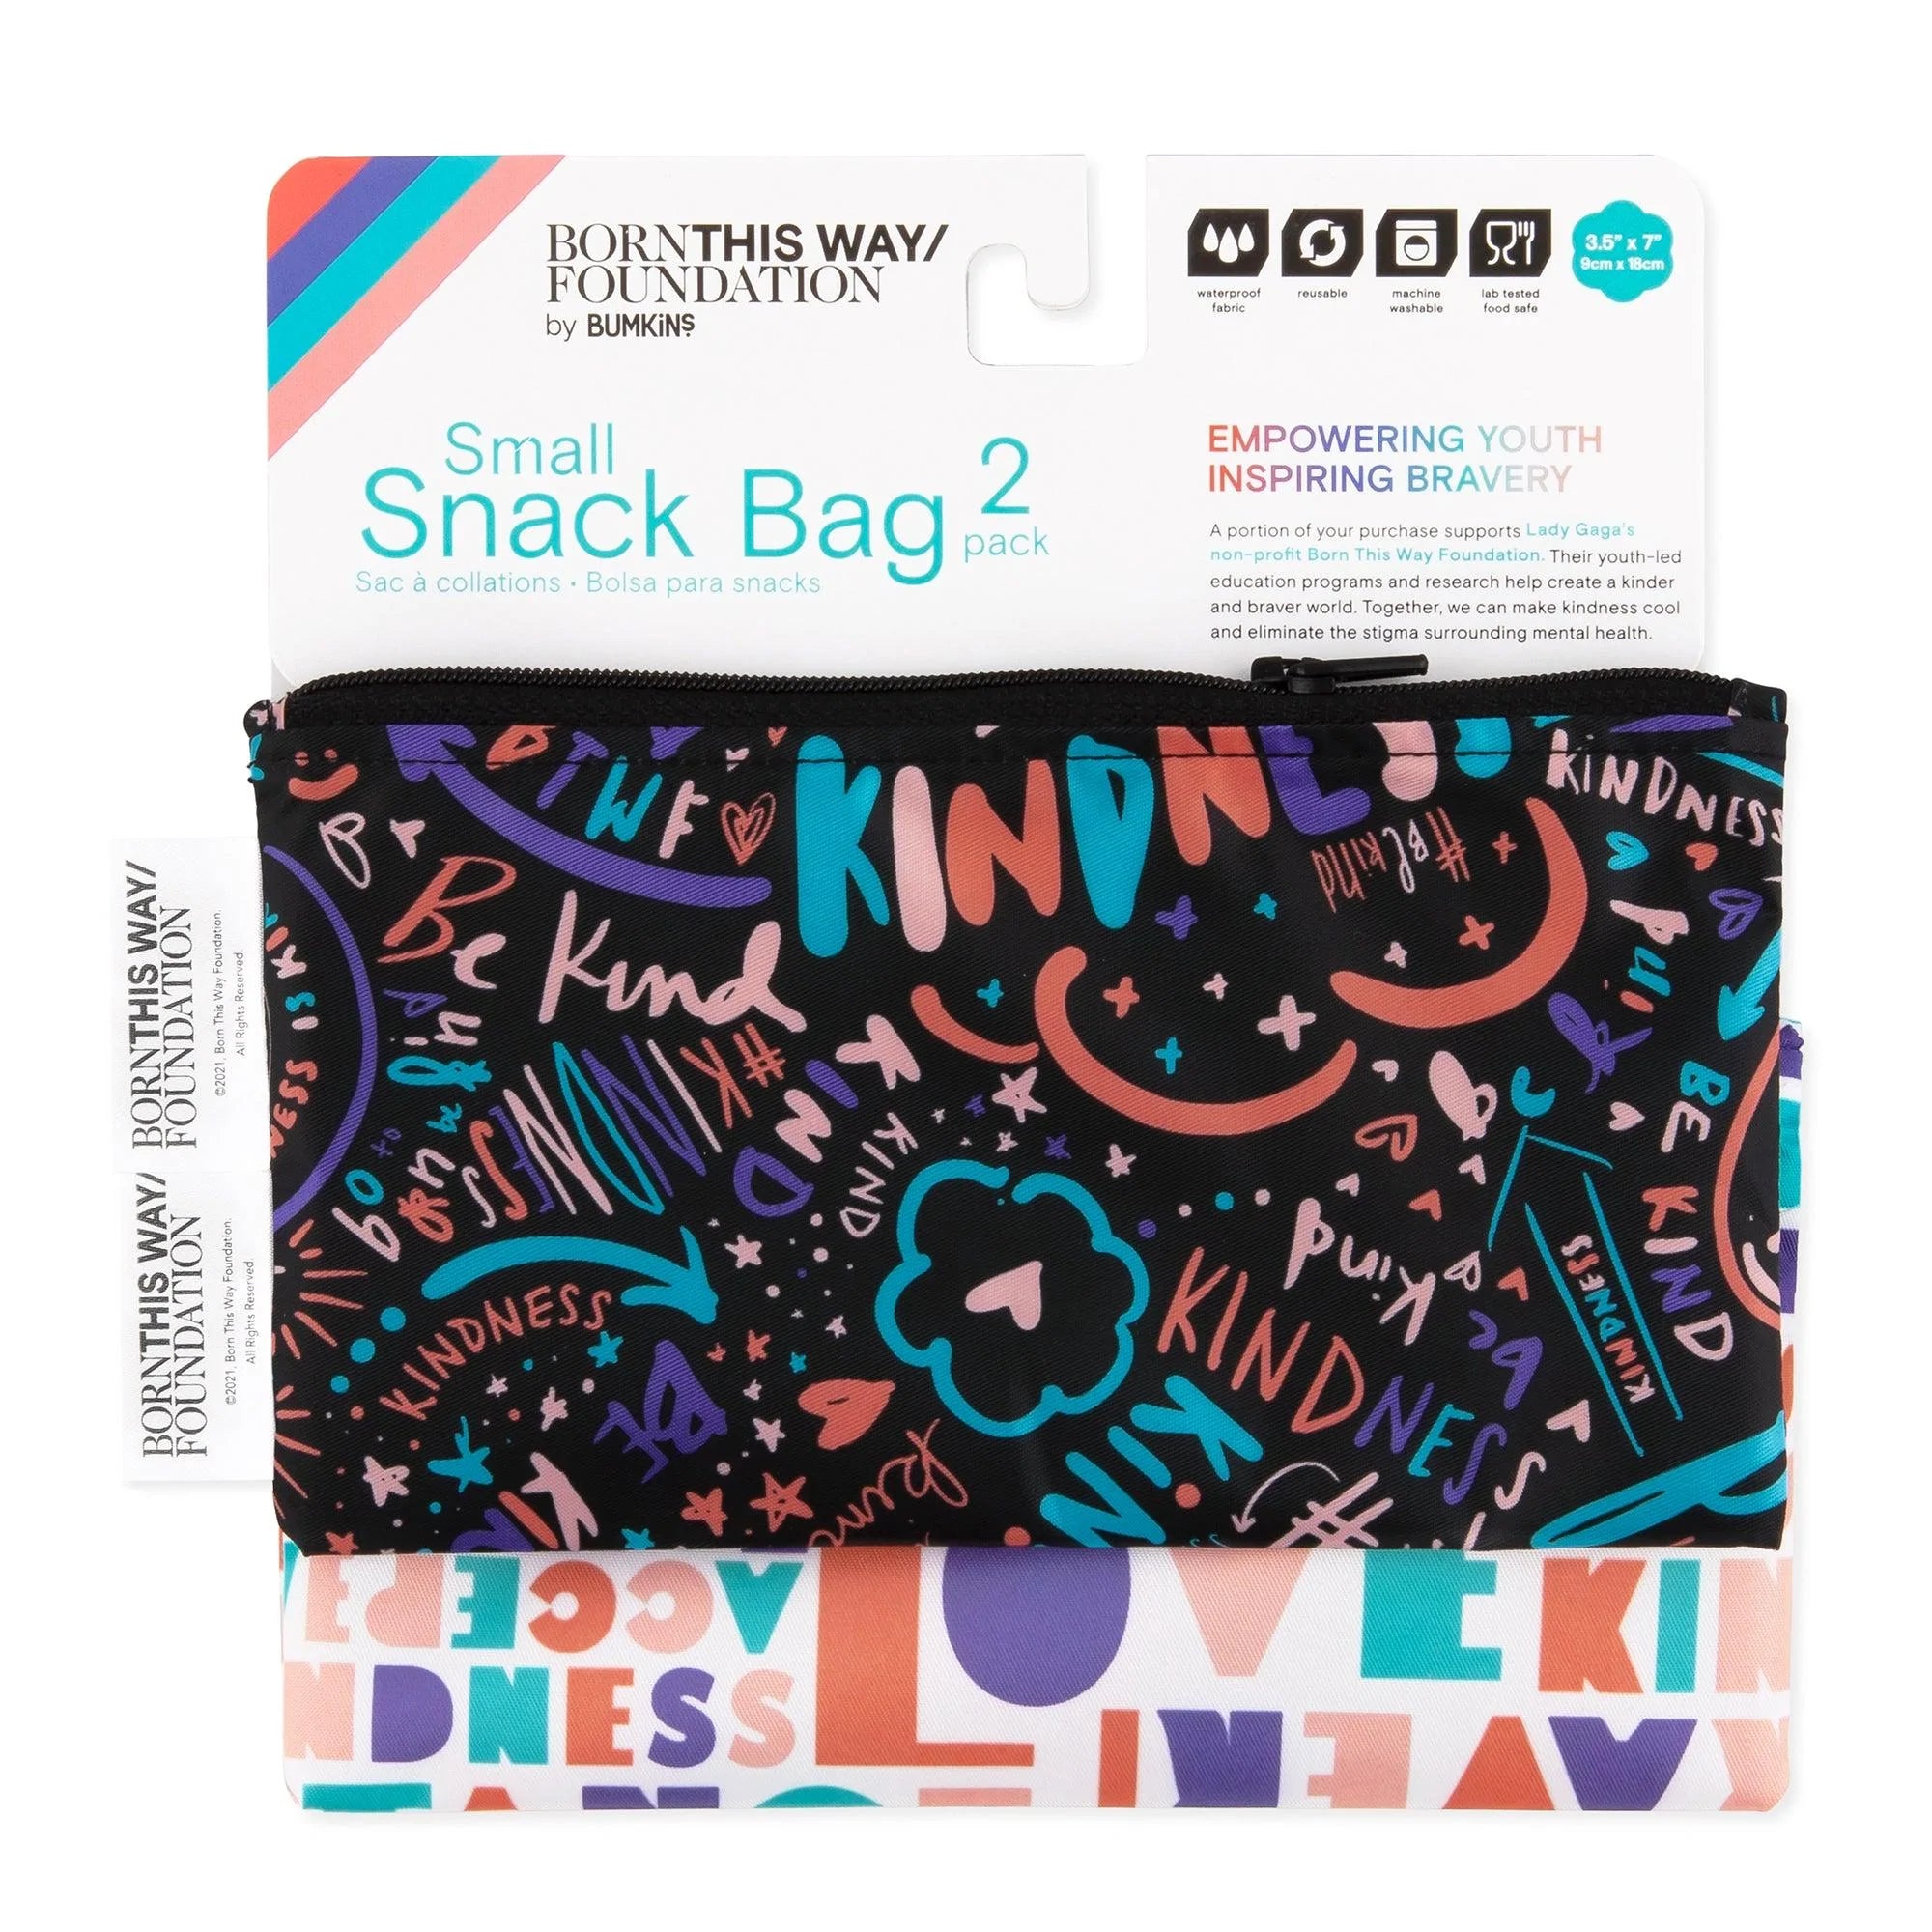 Reusable Snack Bag, Small 2-Pack: Channel Kindness & Elements of Kindness